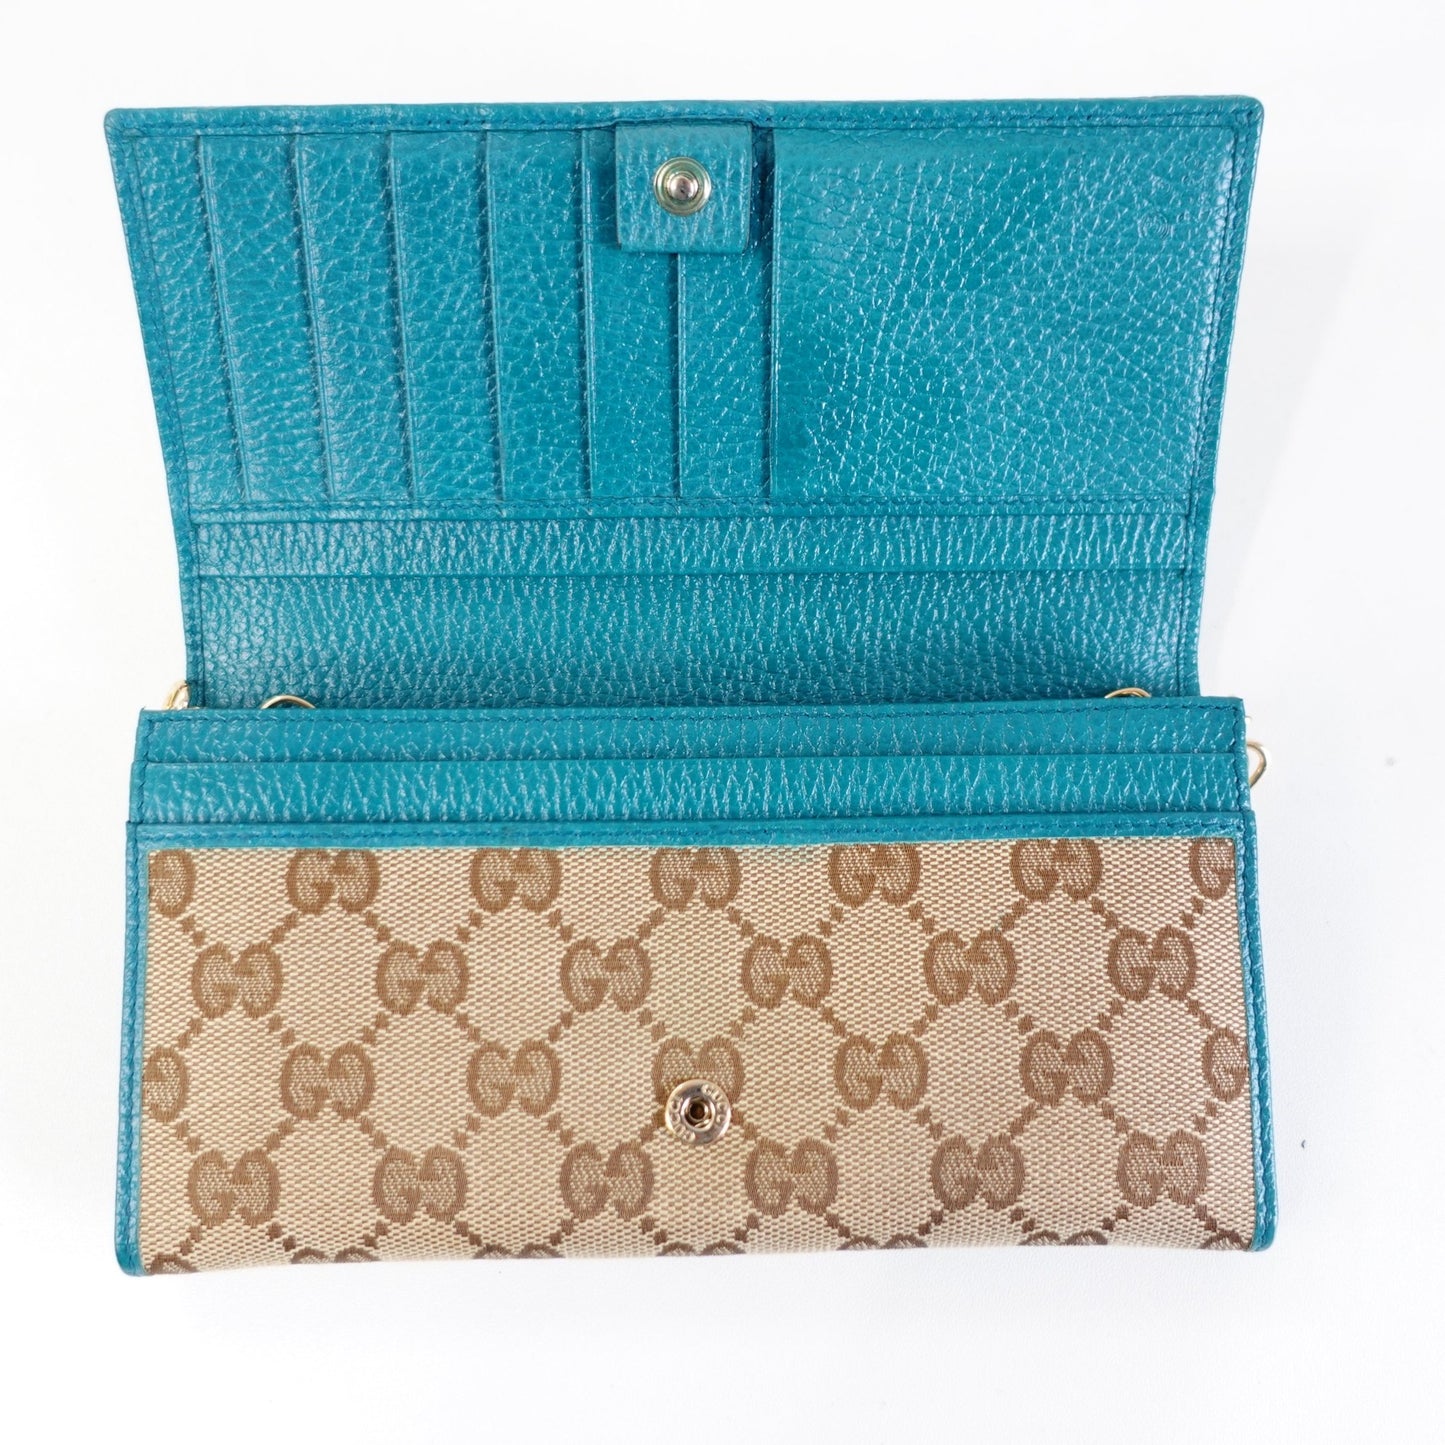 Gucci GG Canvas Continental Wallet with Unbranded Chain - Bag Envy